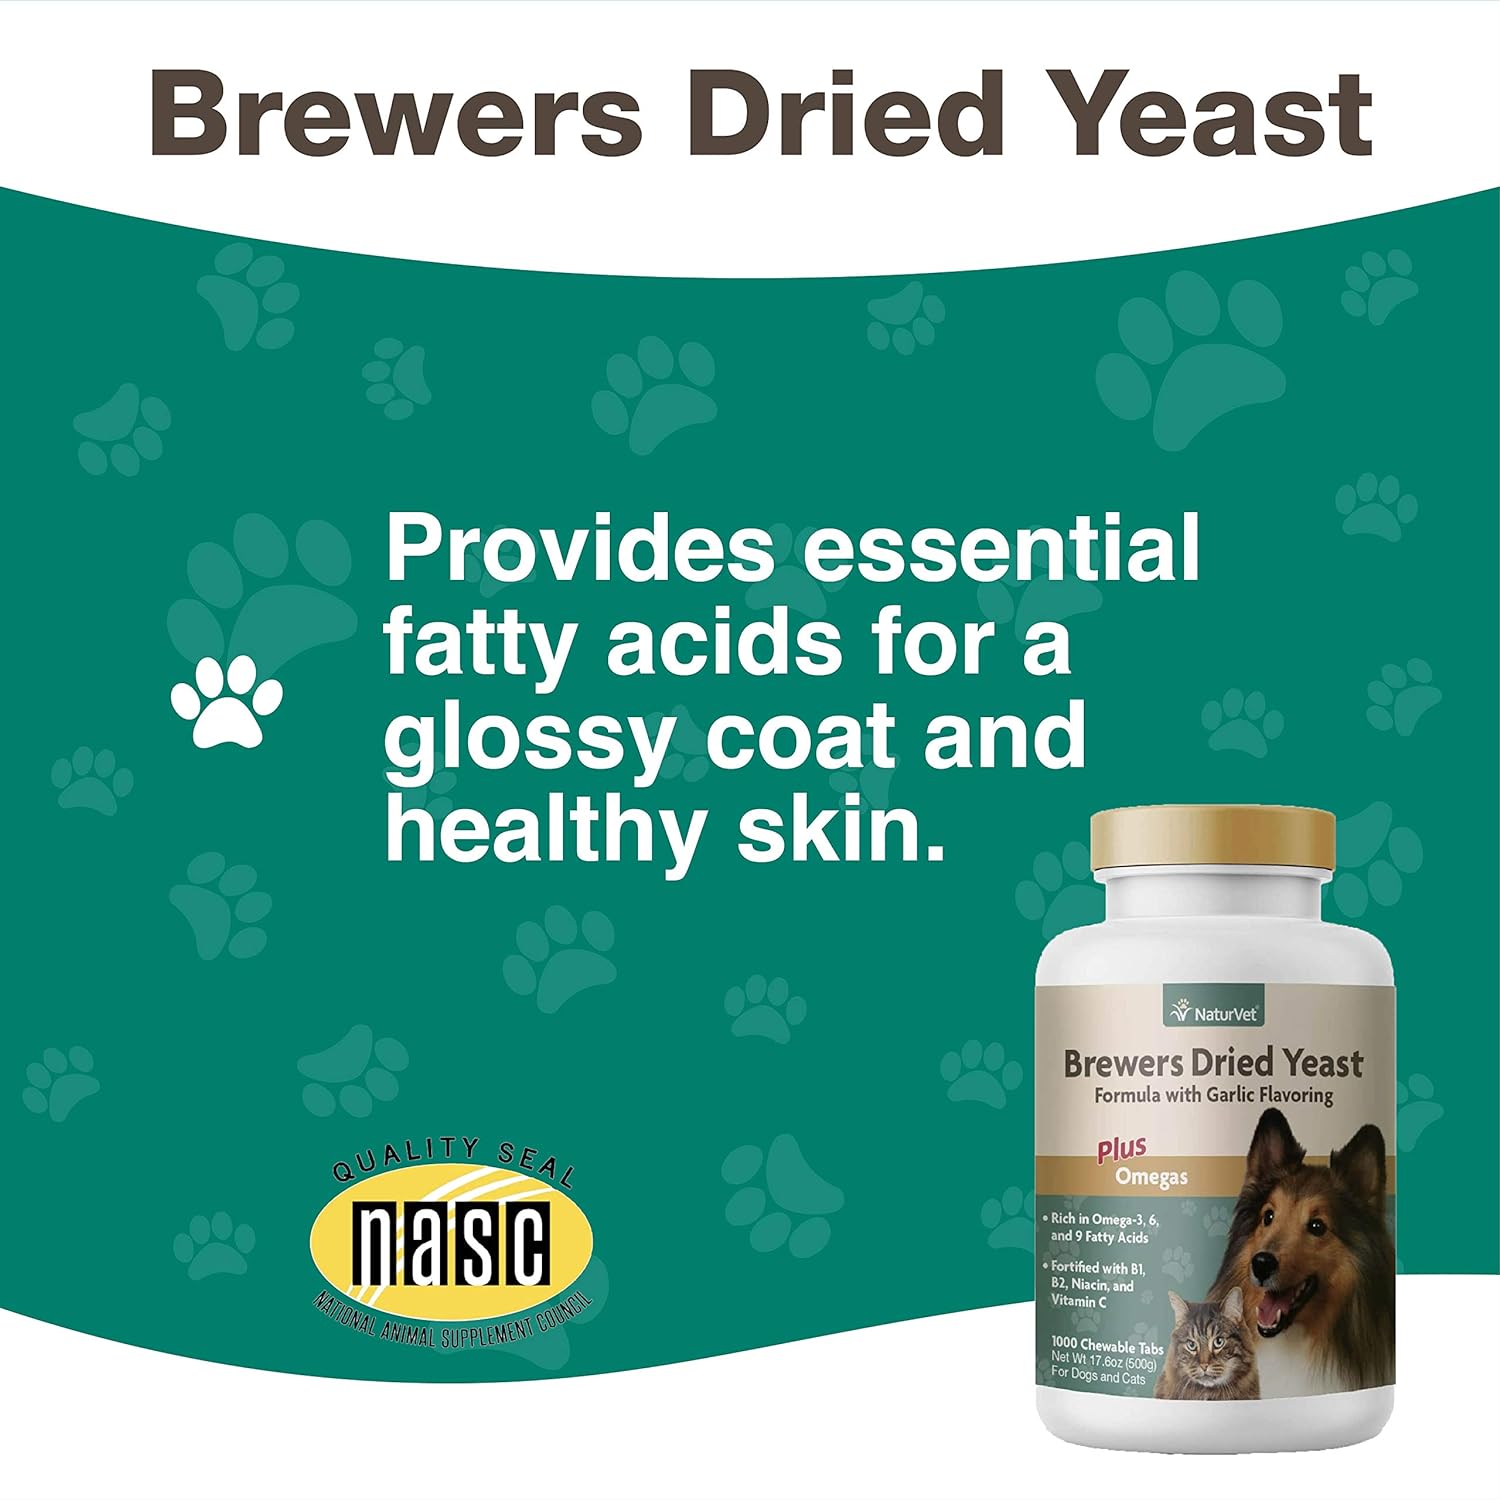 NaturVet – Brewer’s Dried Yeast Formula with Garlic Flavoring – Plus Omegas | Rich in Omega-3, 6 & 9 Fatty Acids | Fortified with B1, B2, Niacin & Vitamin C | for Dogs & Cats | 1000 Chewable Tablets : Pet Multivitamins : Pet Supplies